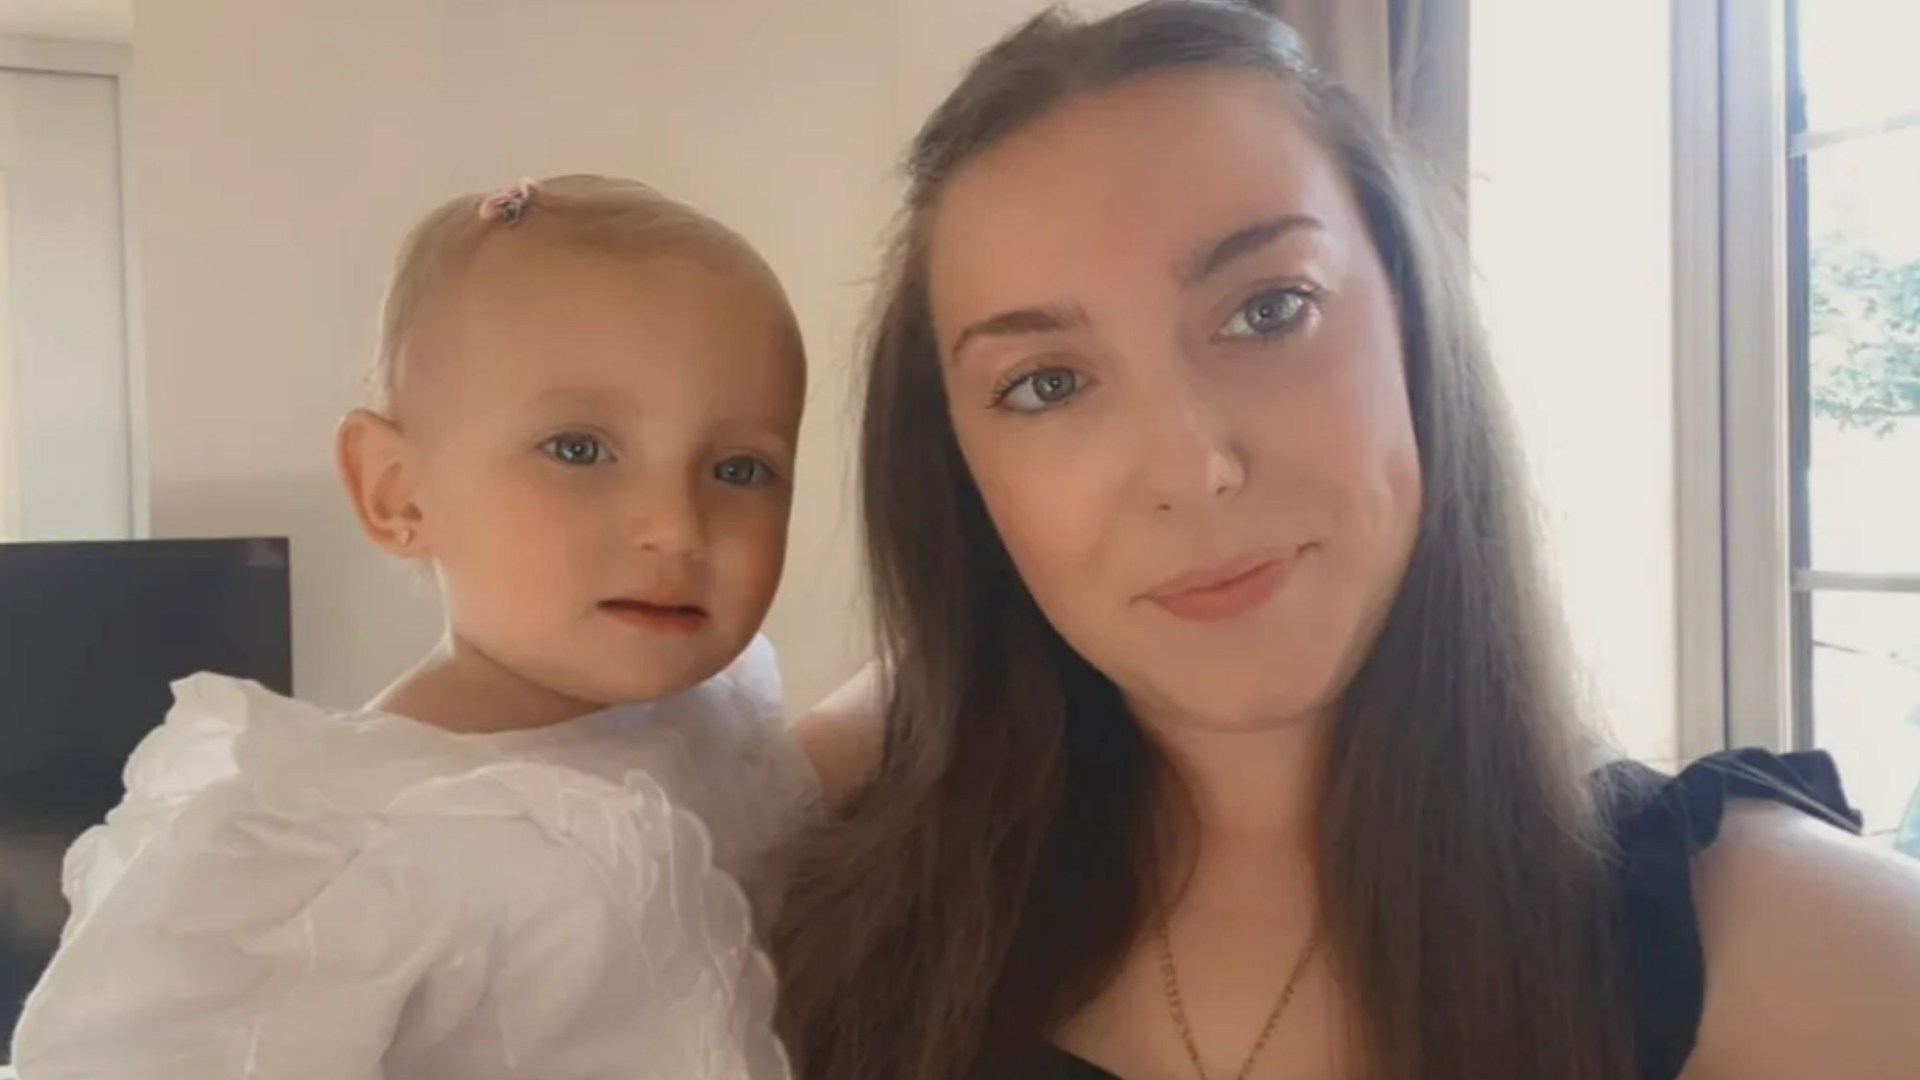 Mum’s urgent warning after Staffordshire Bull Terrier rips off toddler’s lip in unprovoked attack